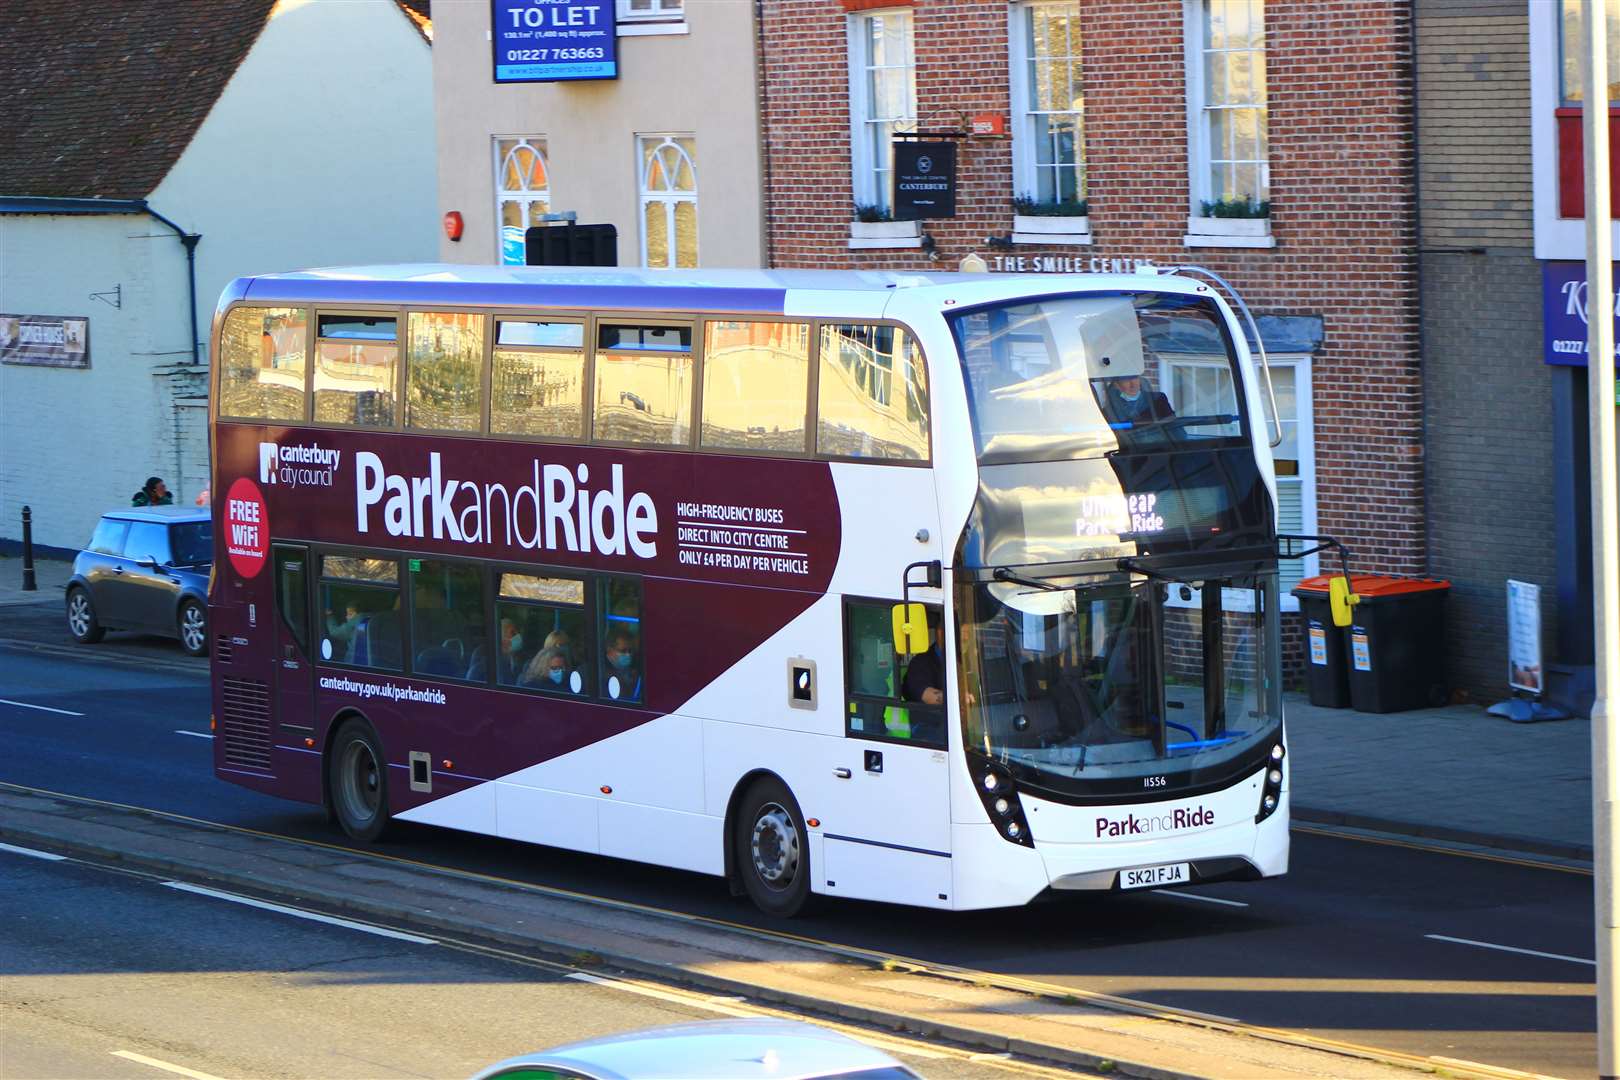 Residents in Deal has suggested a park and ride service could improve the town